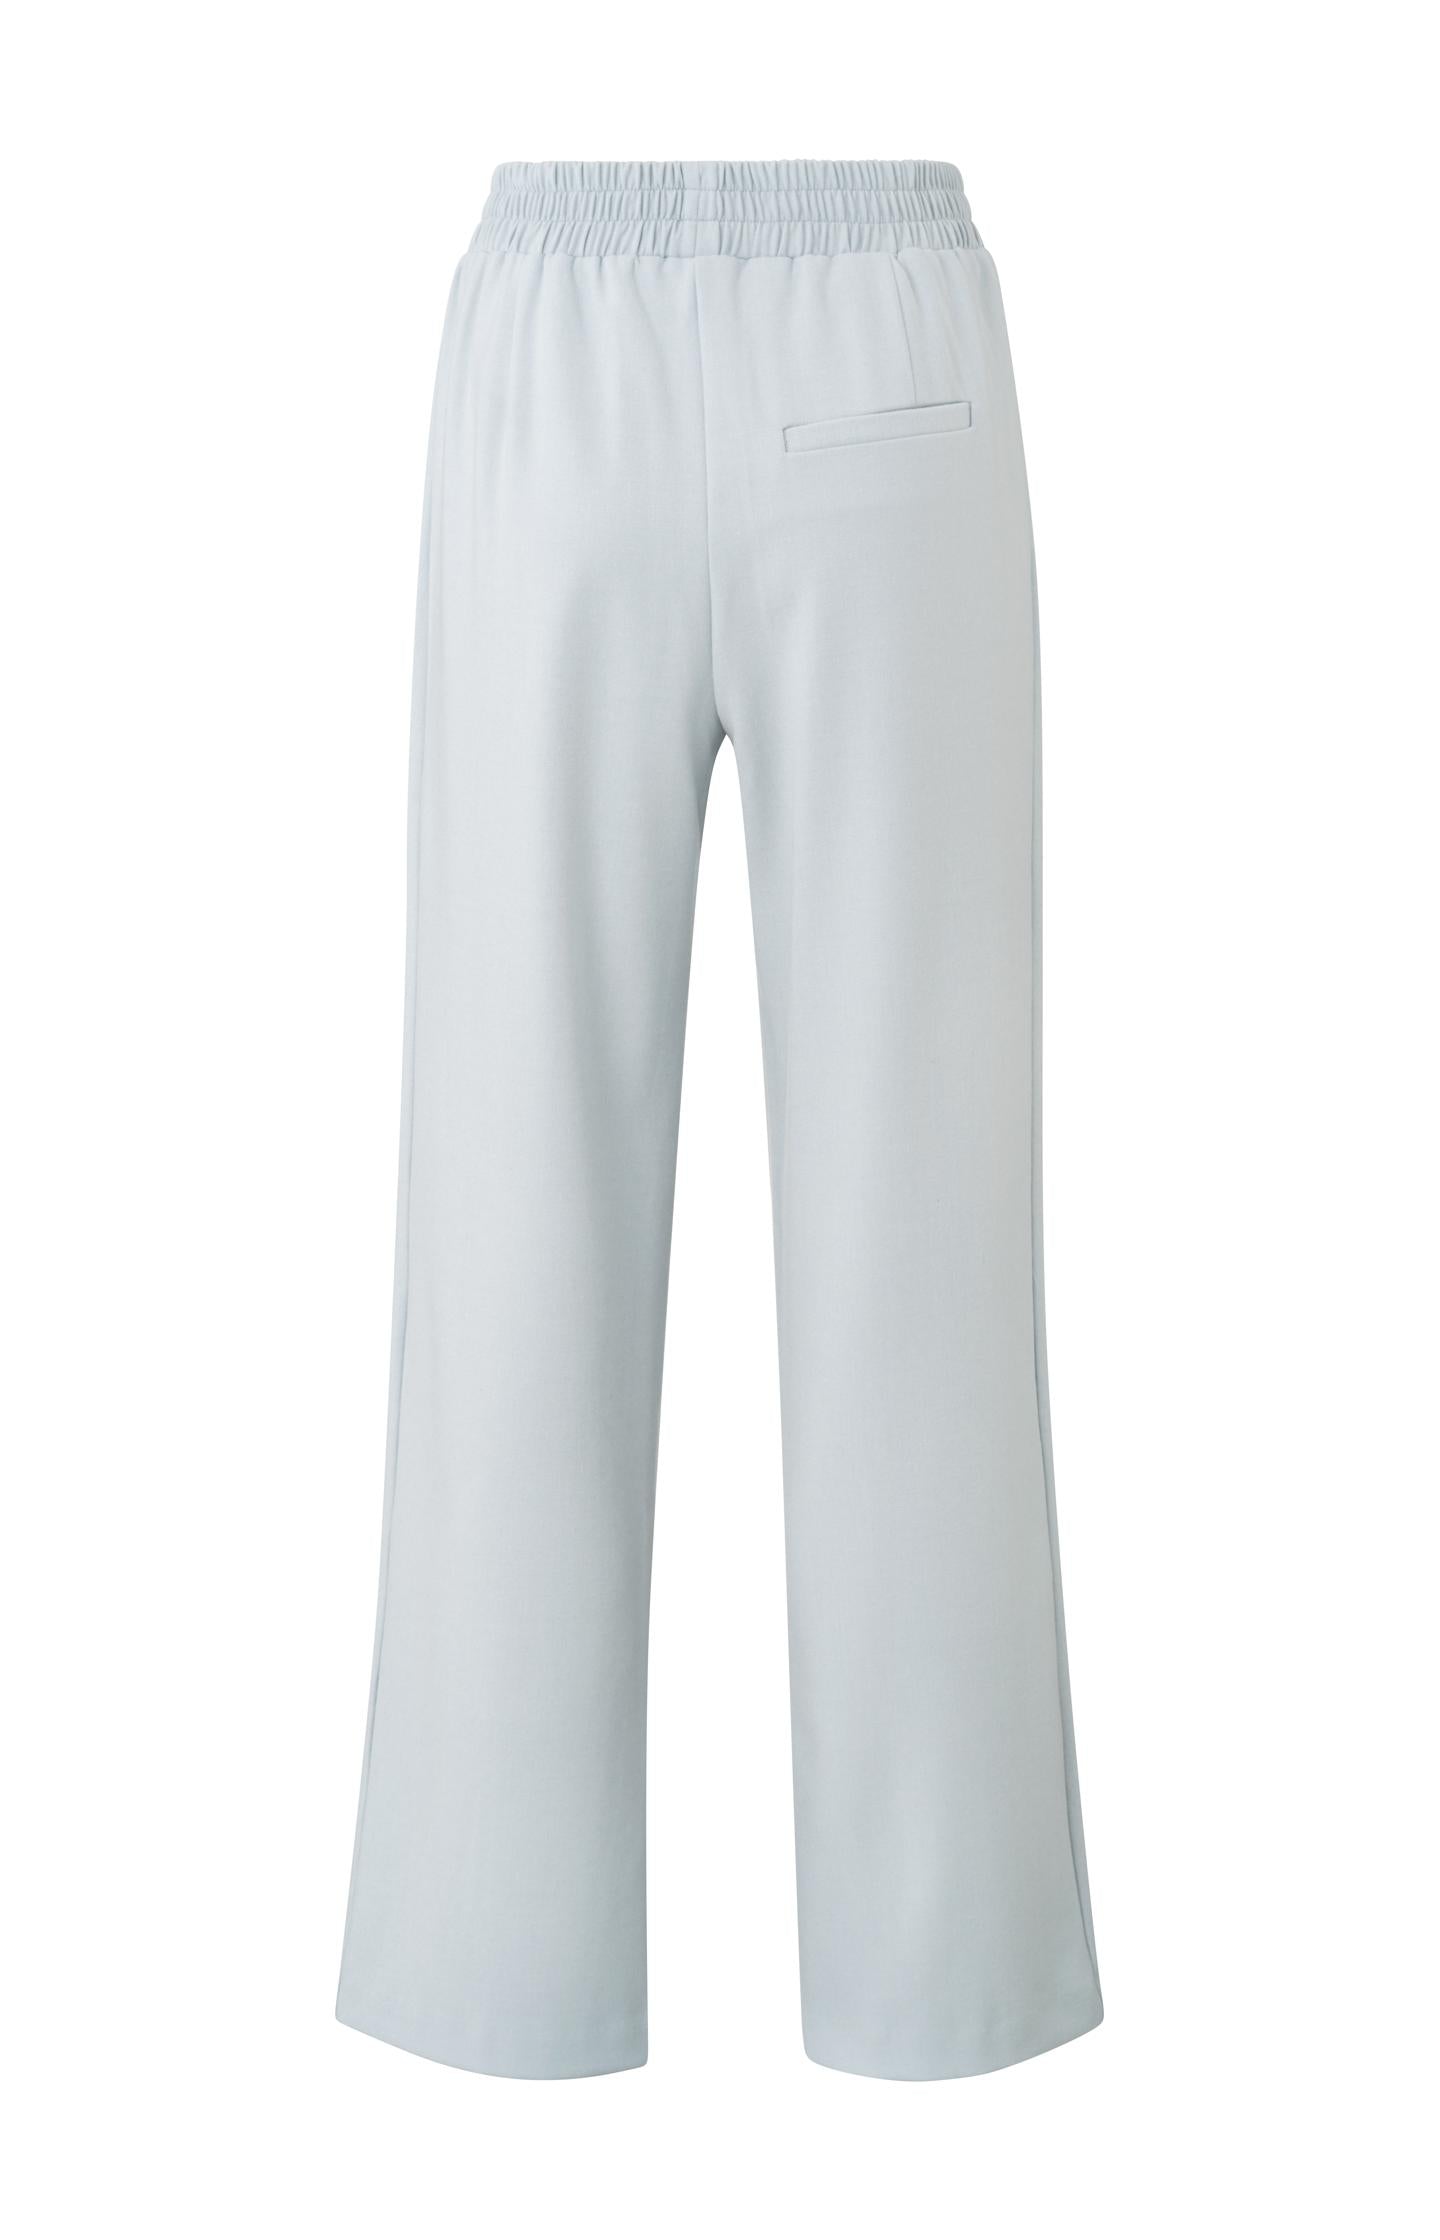 Soft wide leg trousers with elastic waist and seam detail